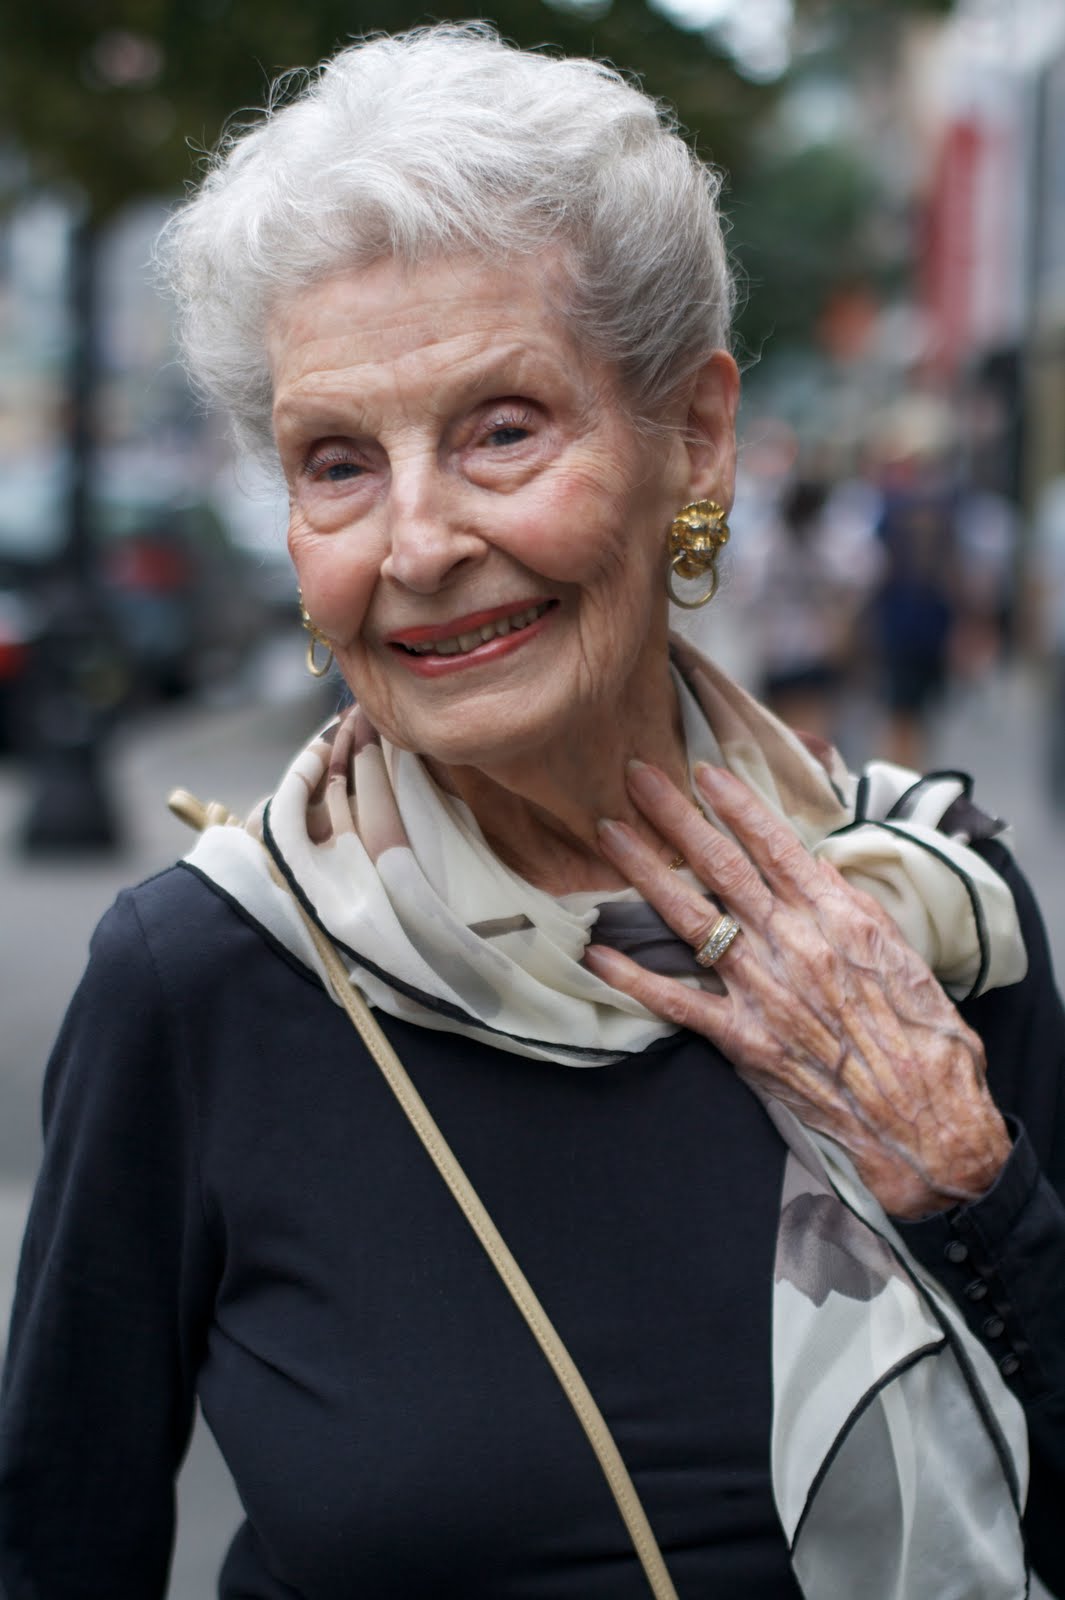 ADVANCED STYLE: Advanced Style Profile of a 100 Year Old Lady